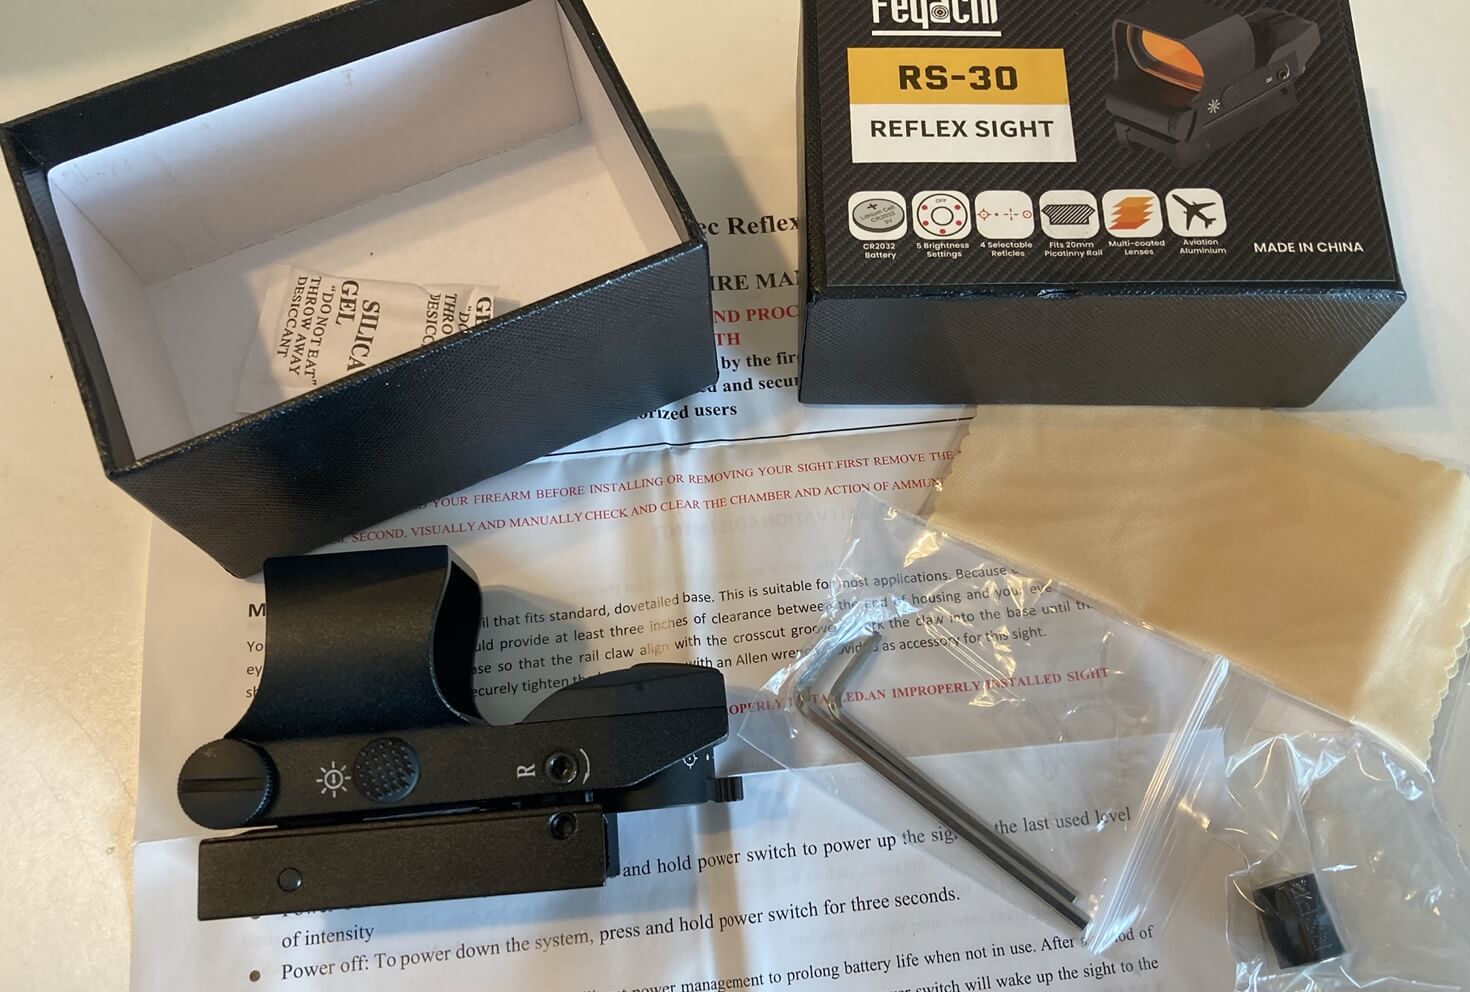 Unboxing the Feyachi RS-30